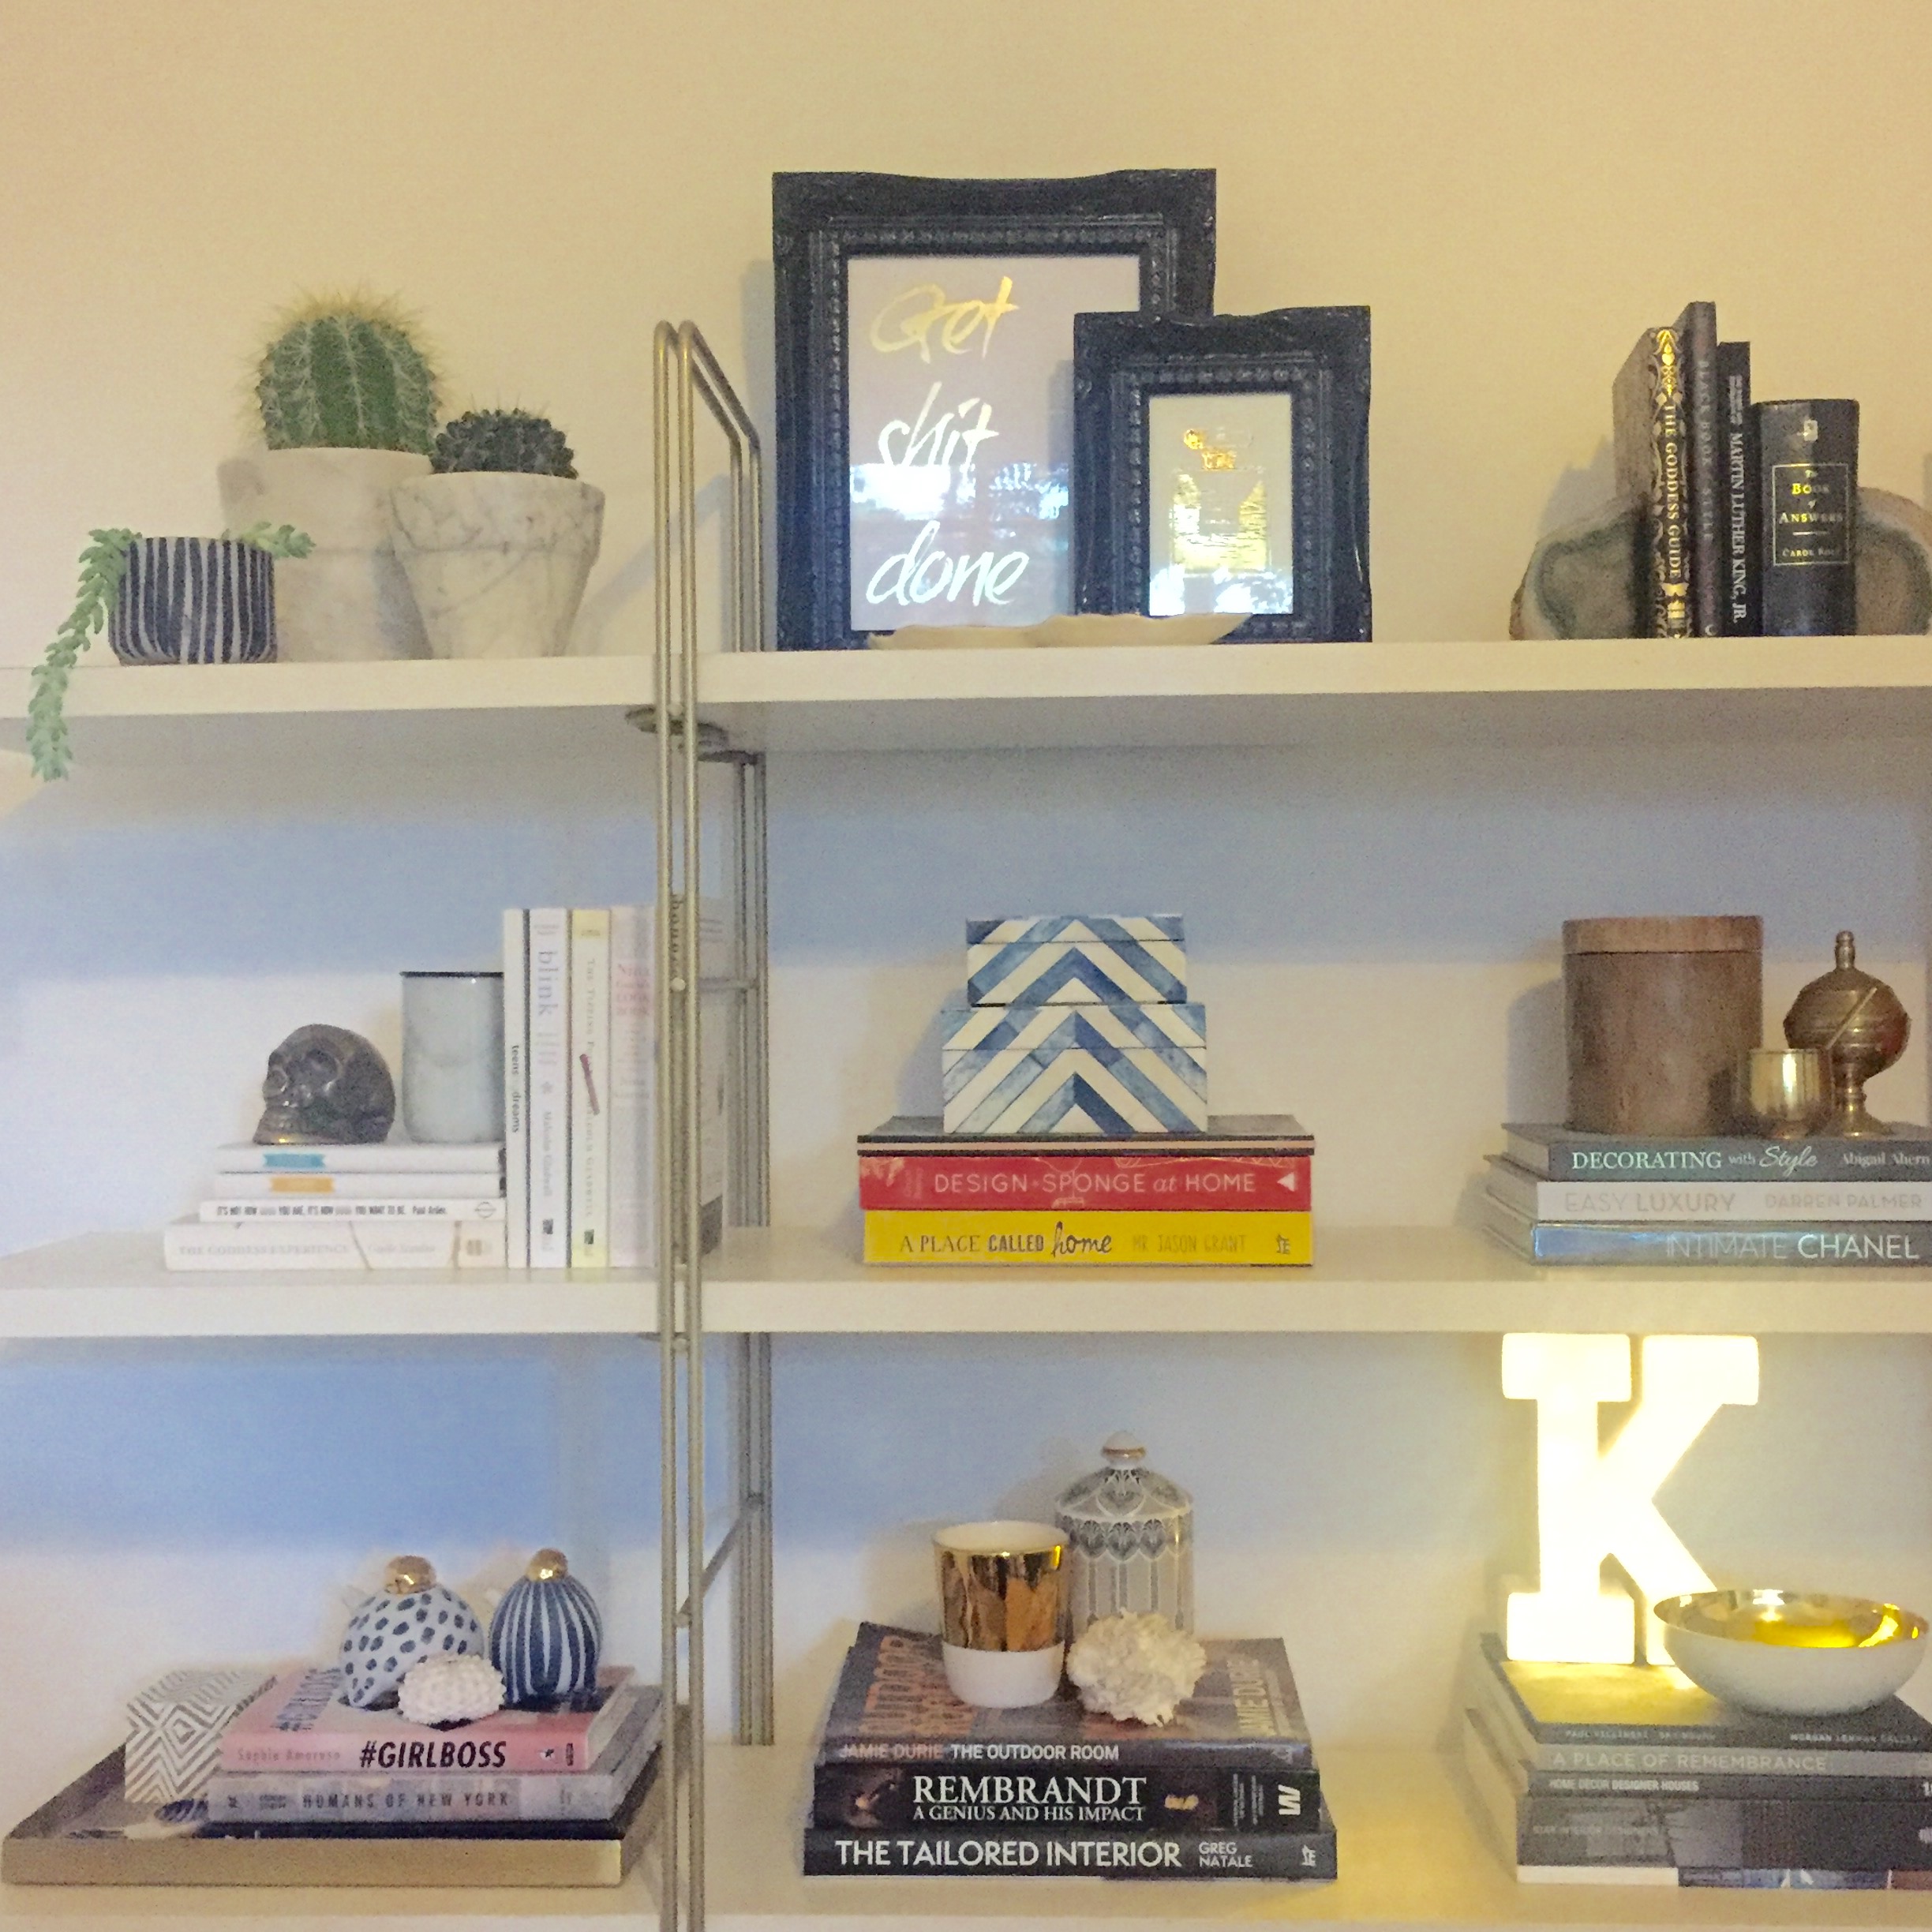 How To Give An Old Ikea Favourite A New Look With Spray Paint